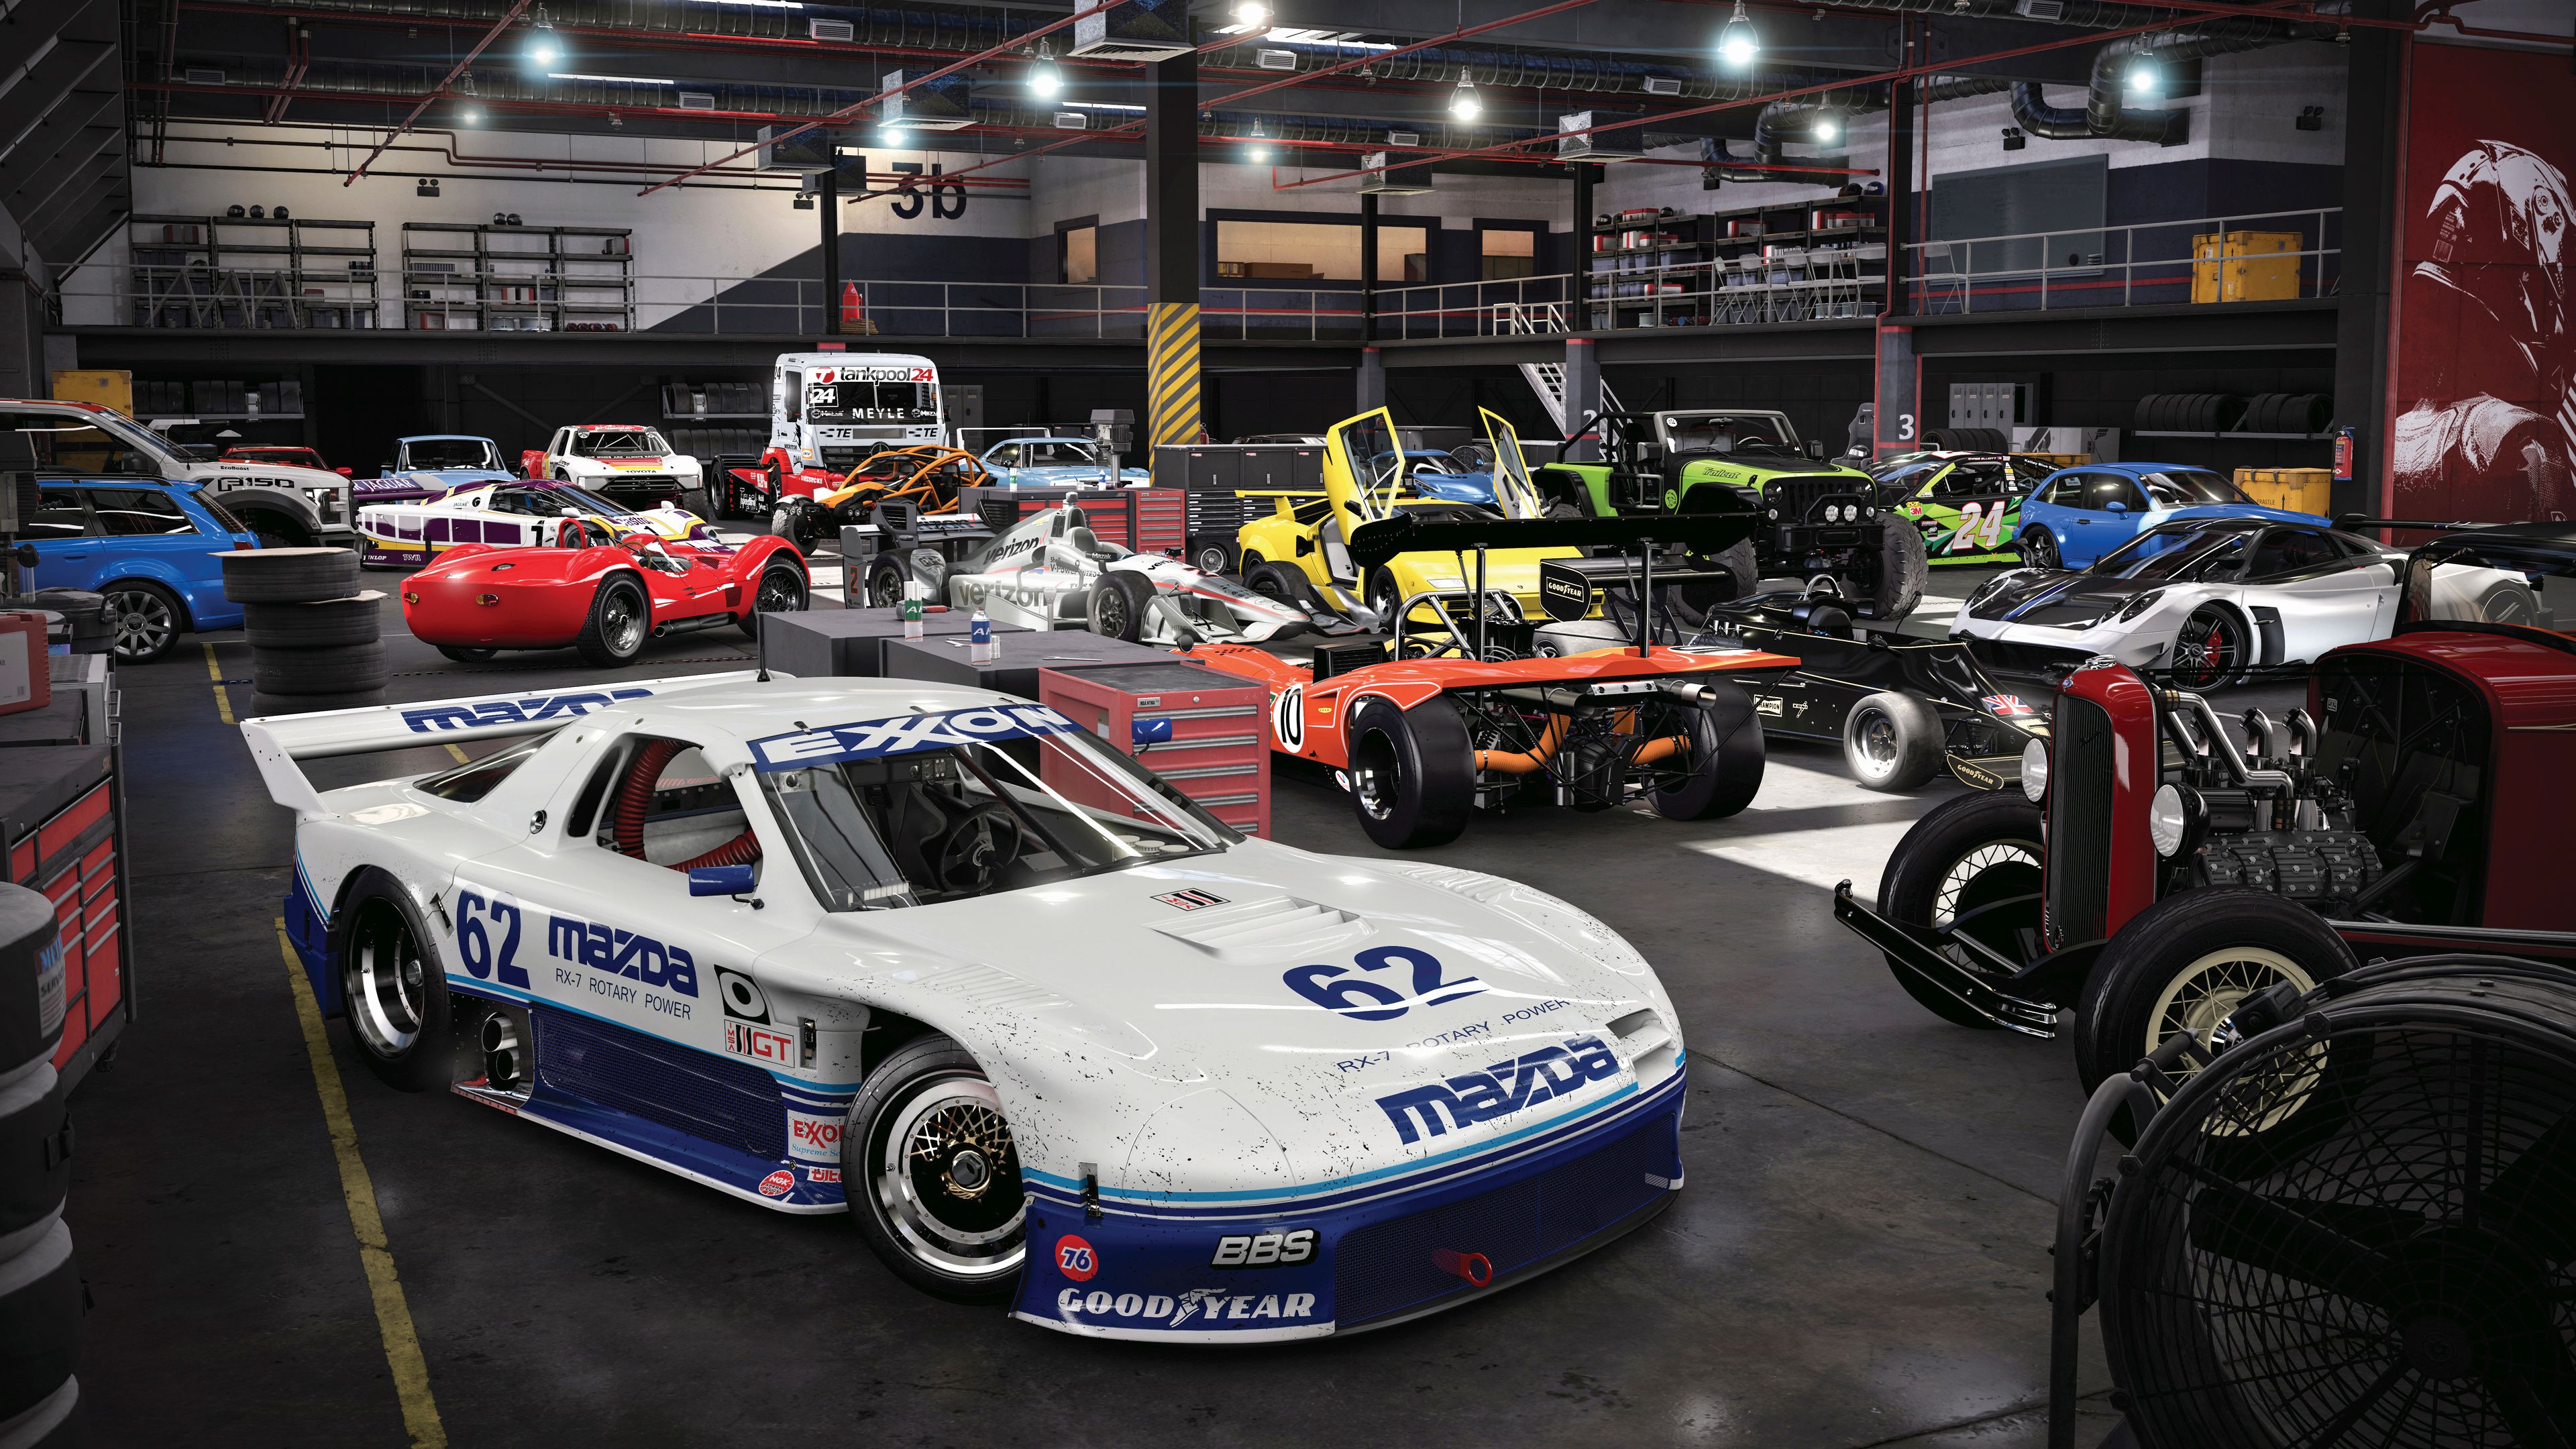 Best racing games - a collection of cars in a large garage